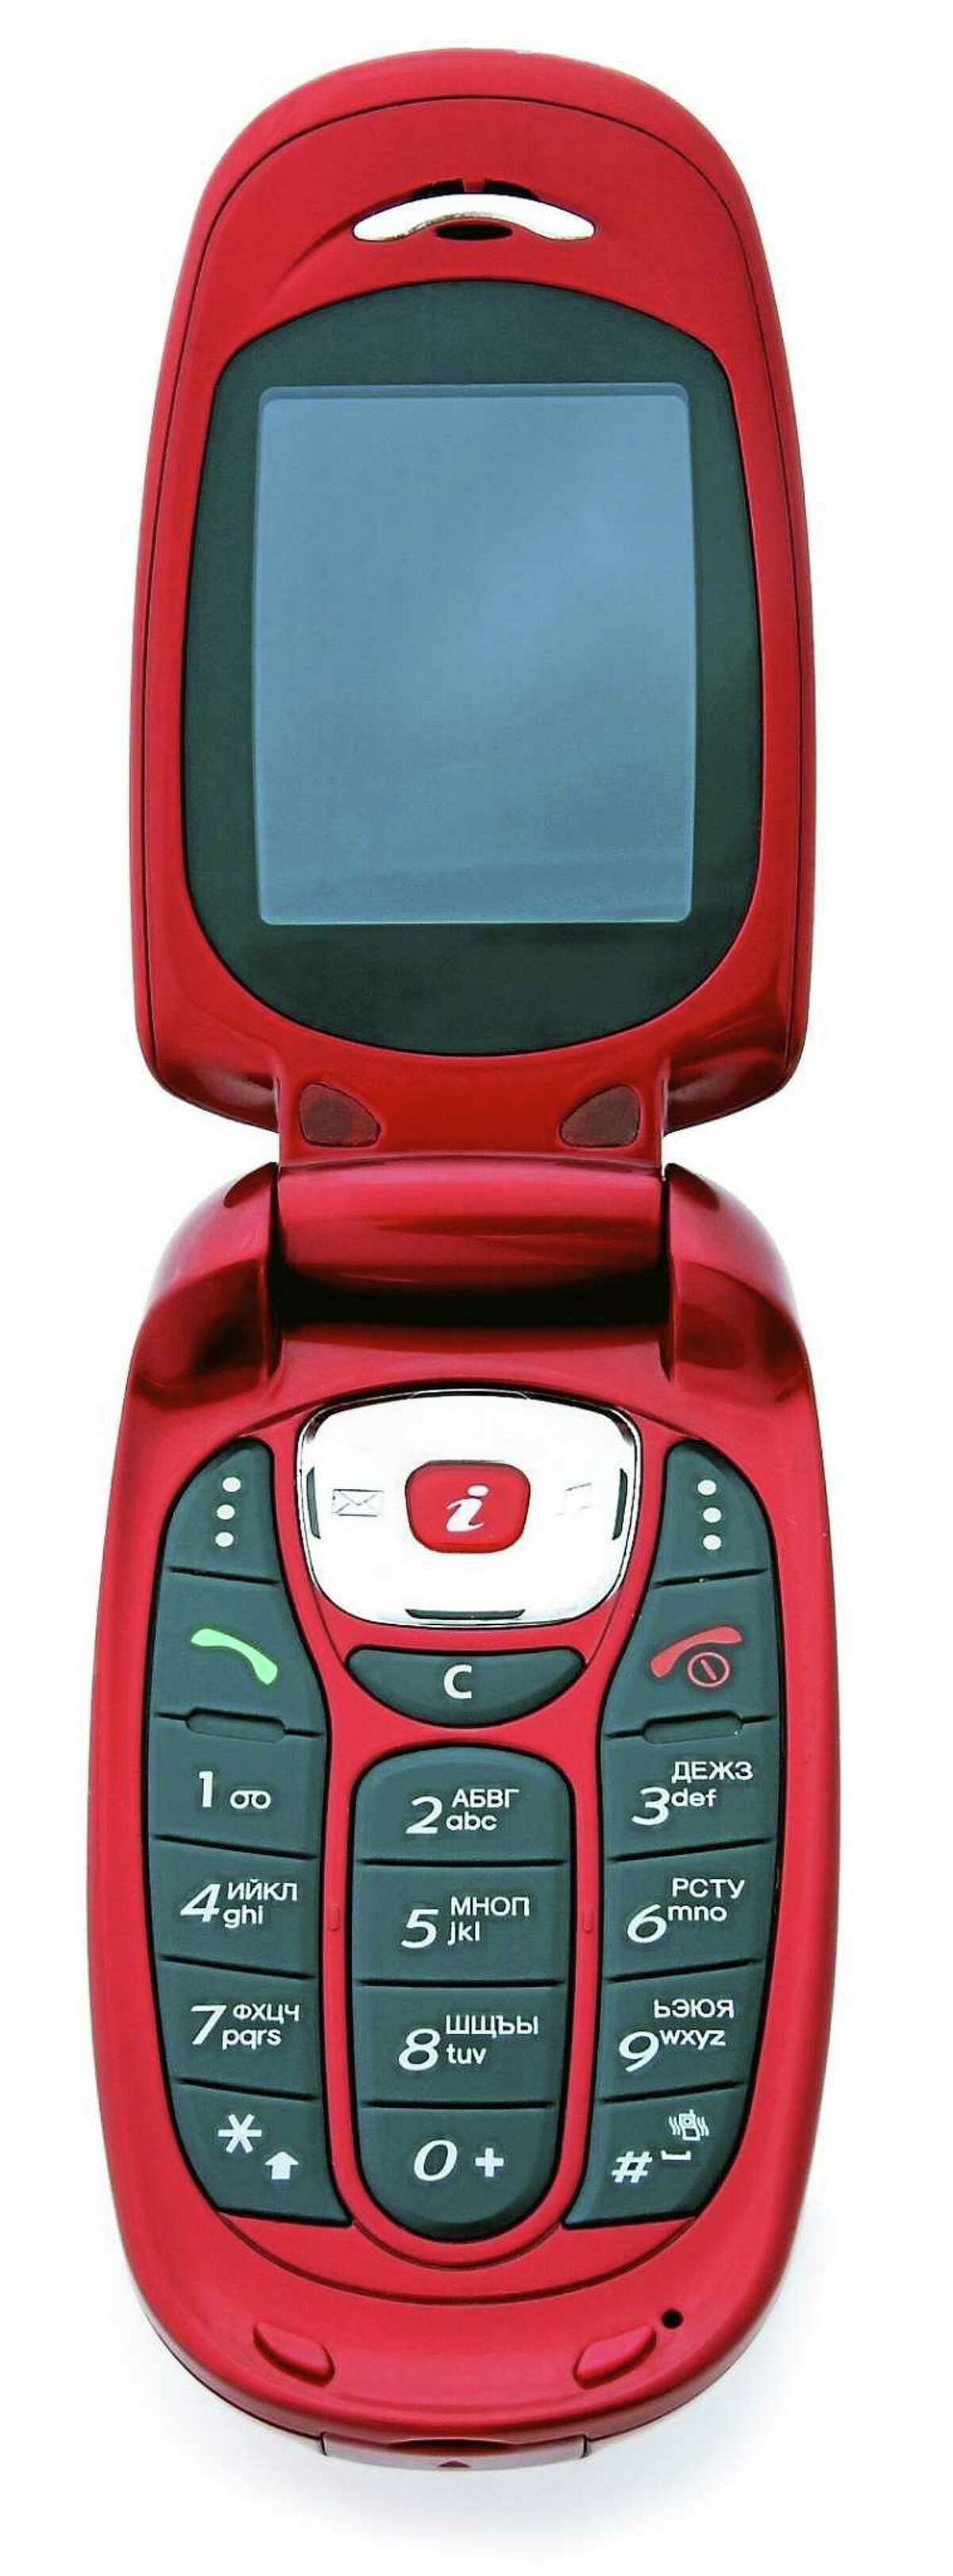 Red cell flip phone.